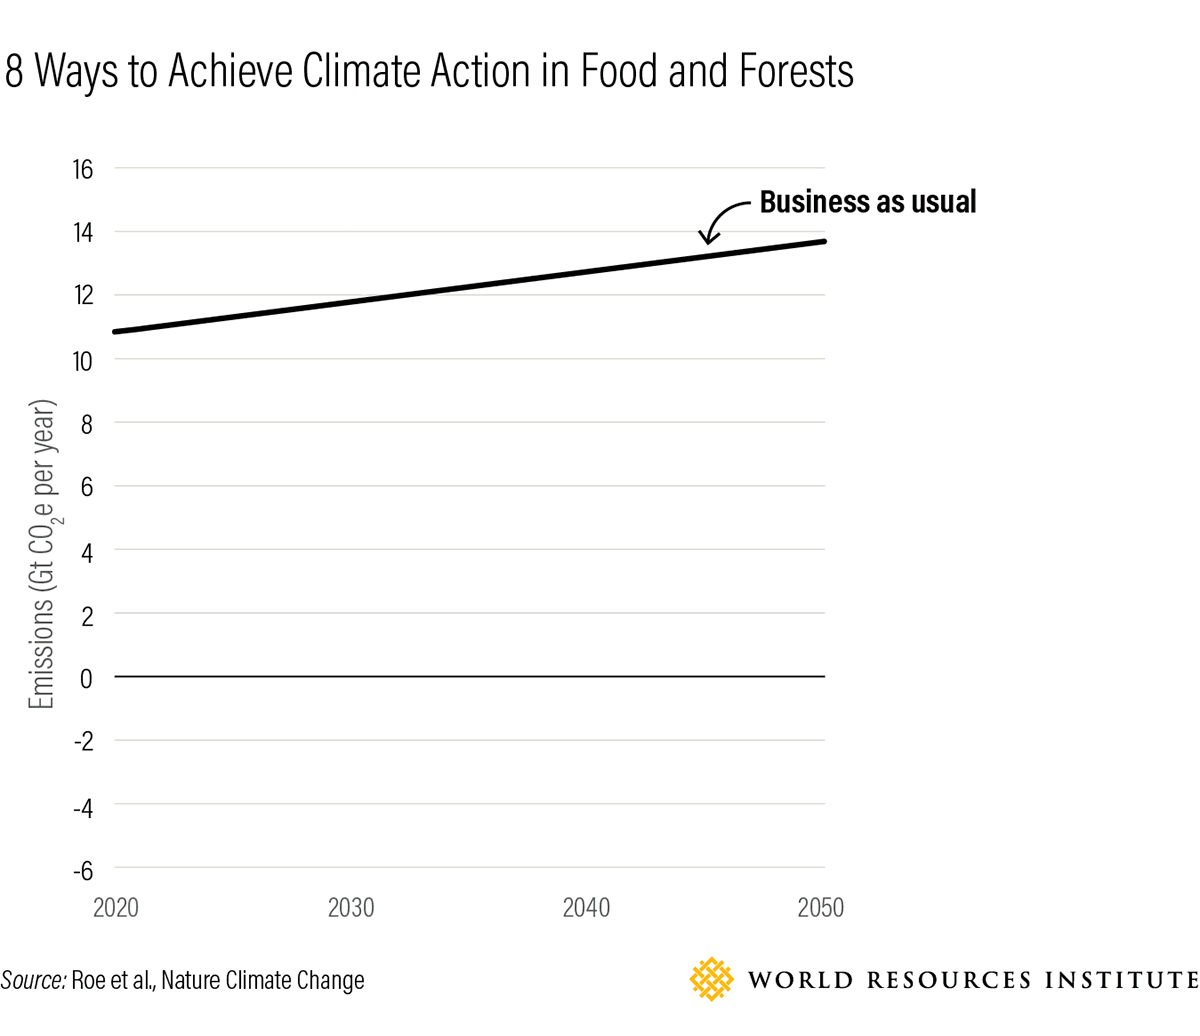 8 Ways to Achieve Climate Action in Food and Forests